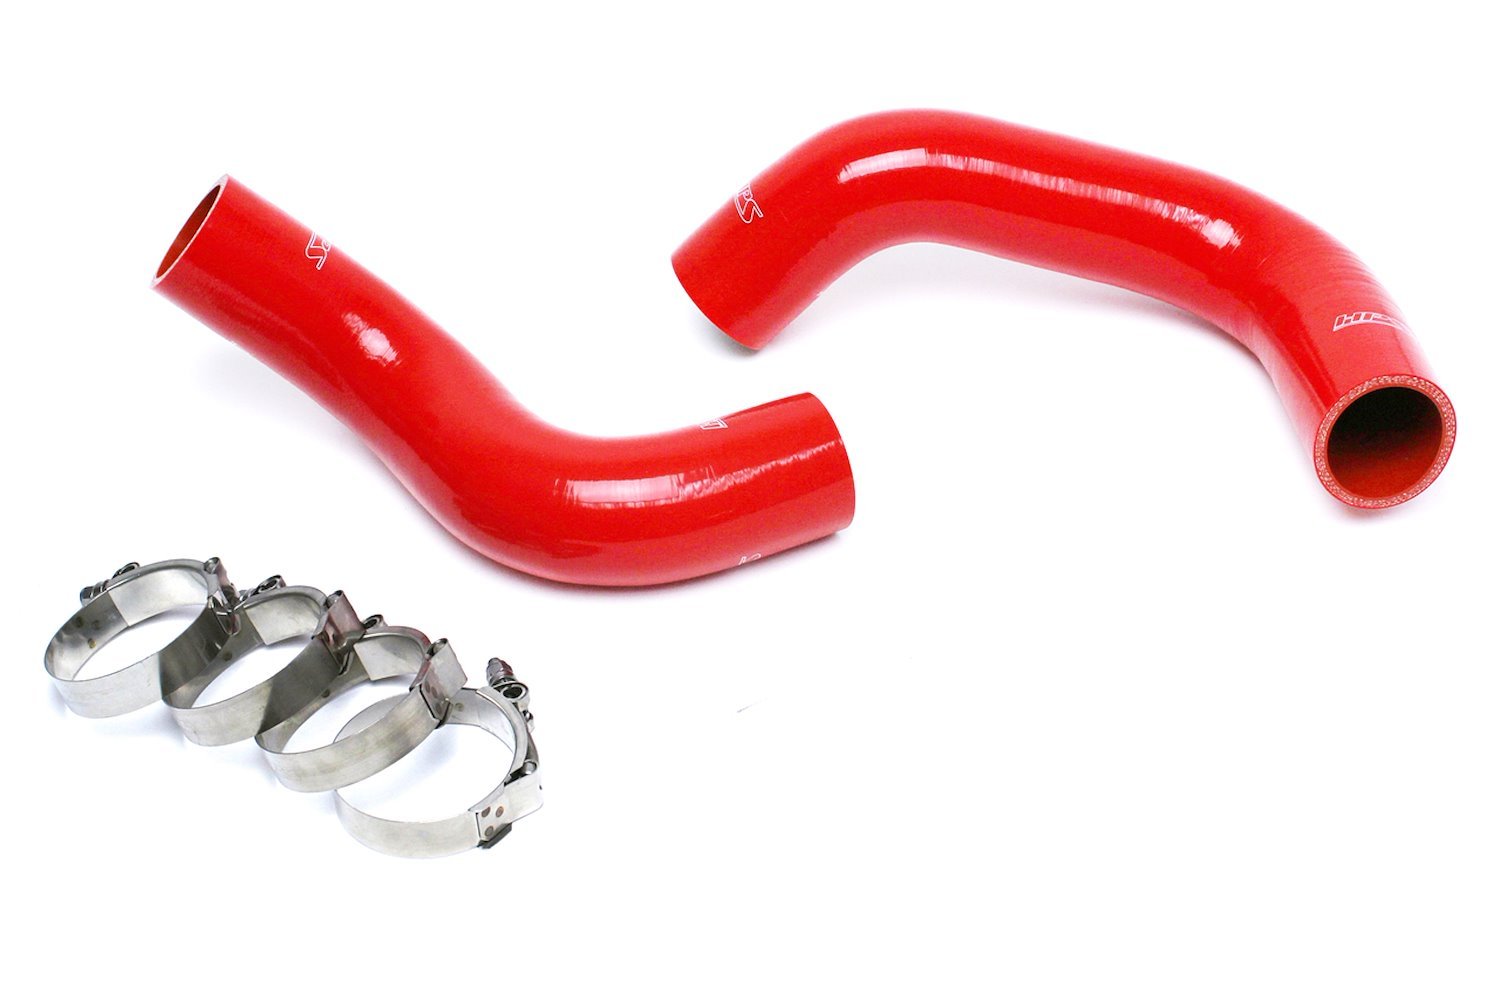 57-1498R-RED Radiator Hose Kit, High-Temp 3-Ply Reinforced Silicone, Replace OEM Rubber Radiator Coolant Hoses